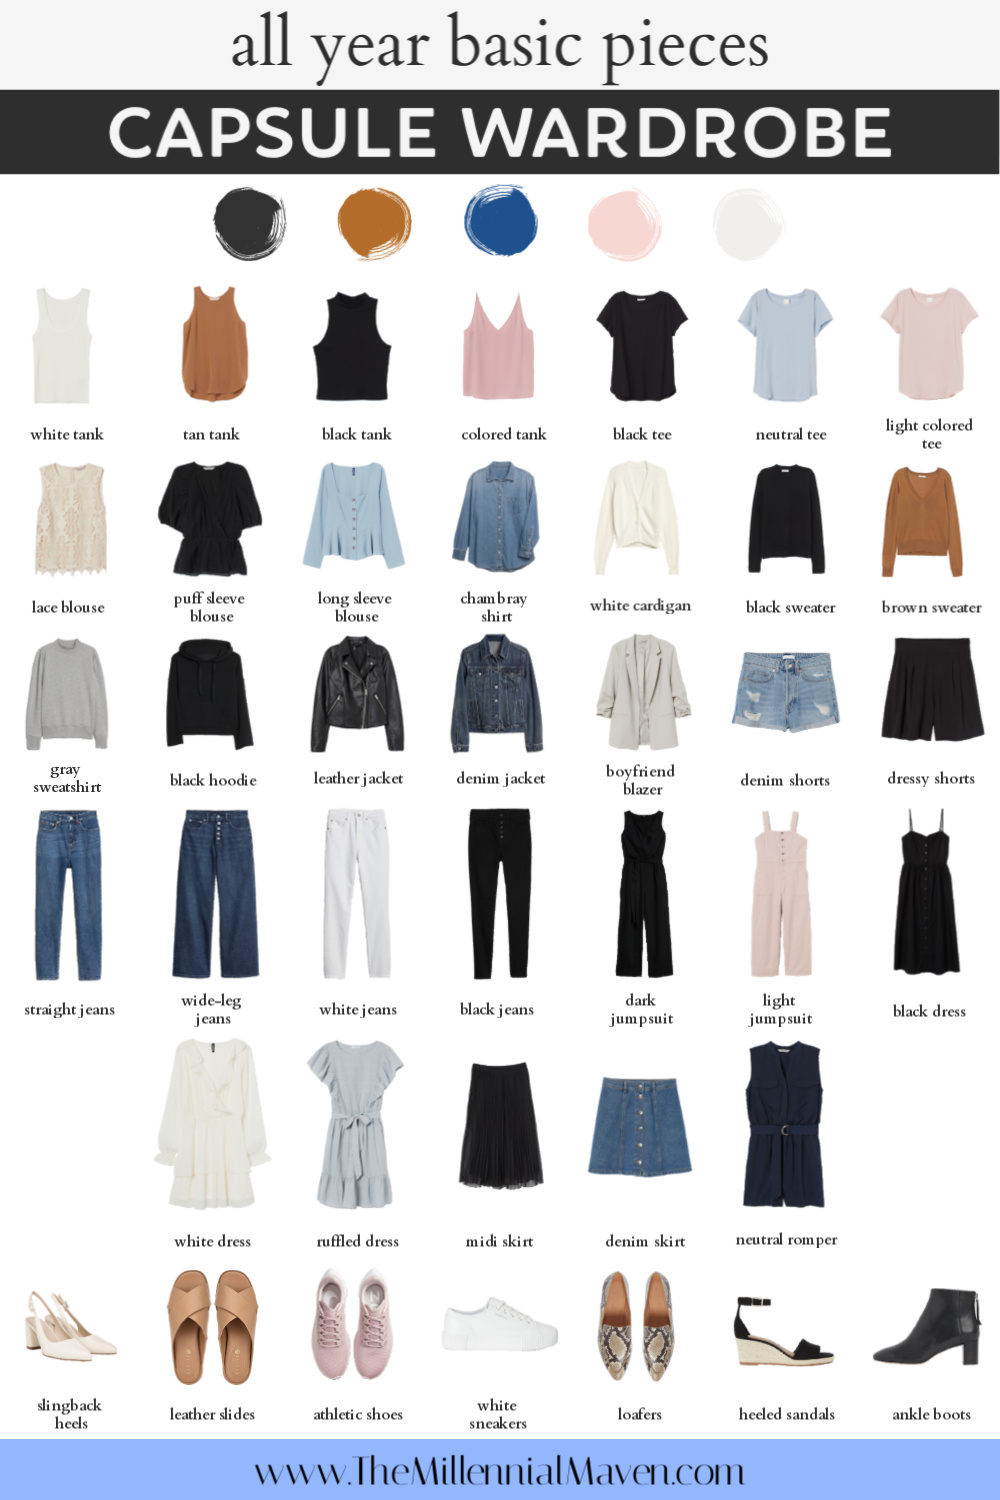 Chow to build an all year capsule wardrobe with basic pieces you can rely on. | Capsule Wardrobe Basics #capsulewardrobe #wardrobebasics #personalstyle